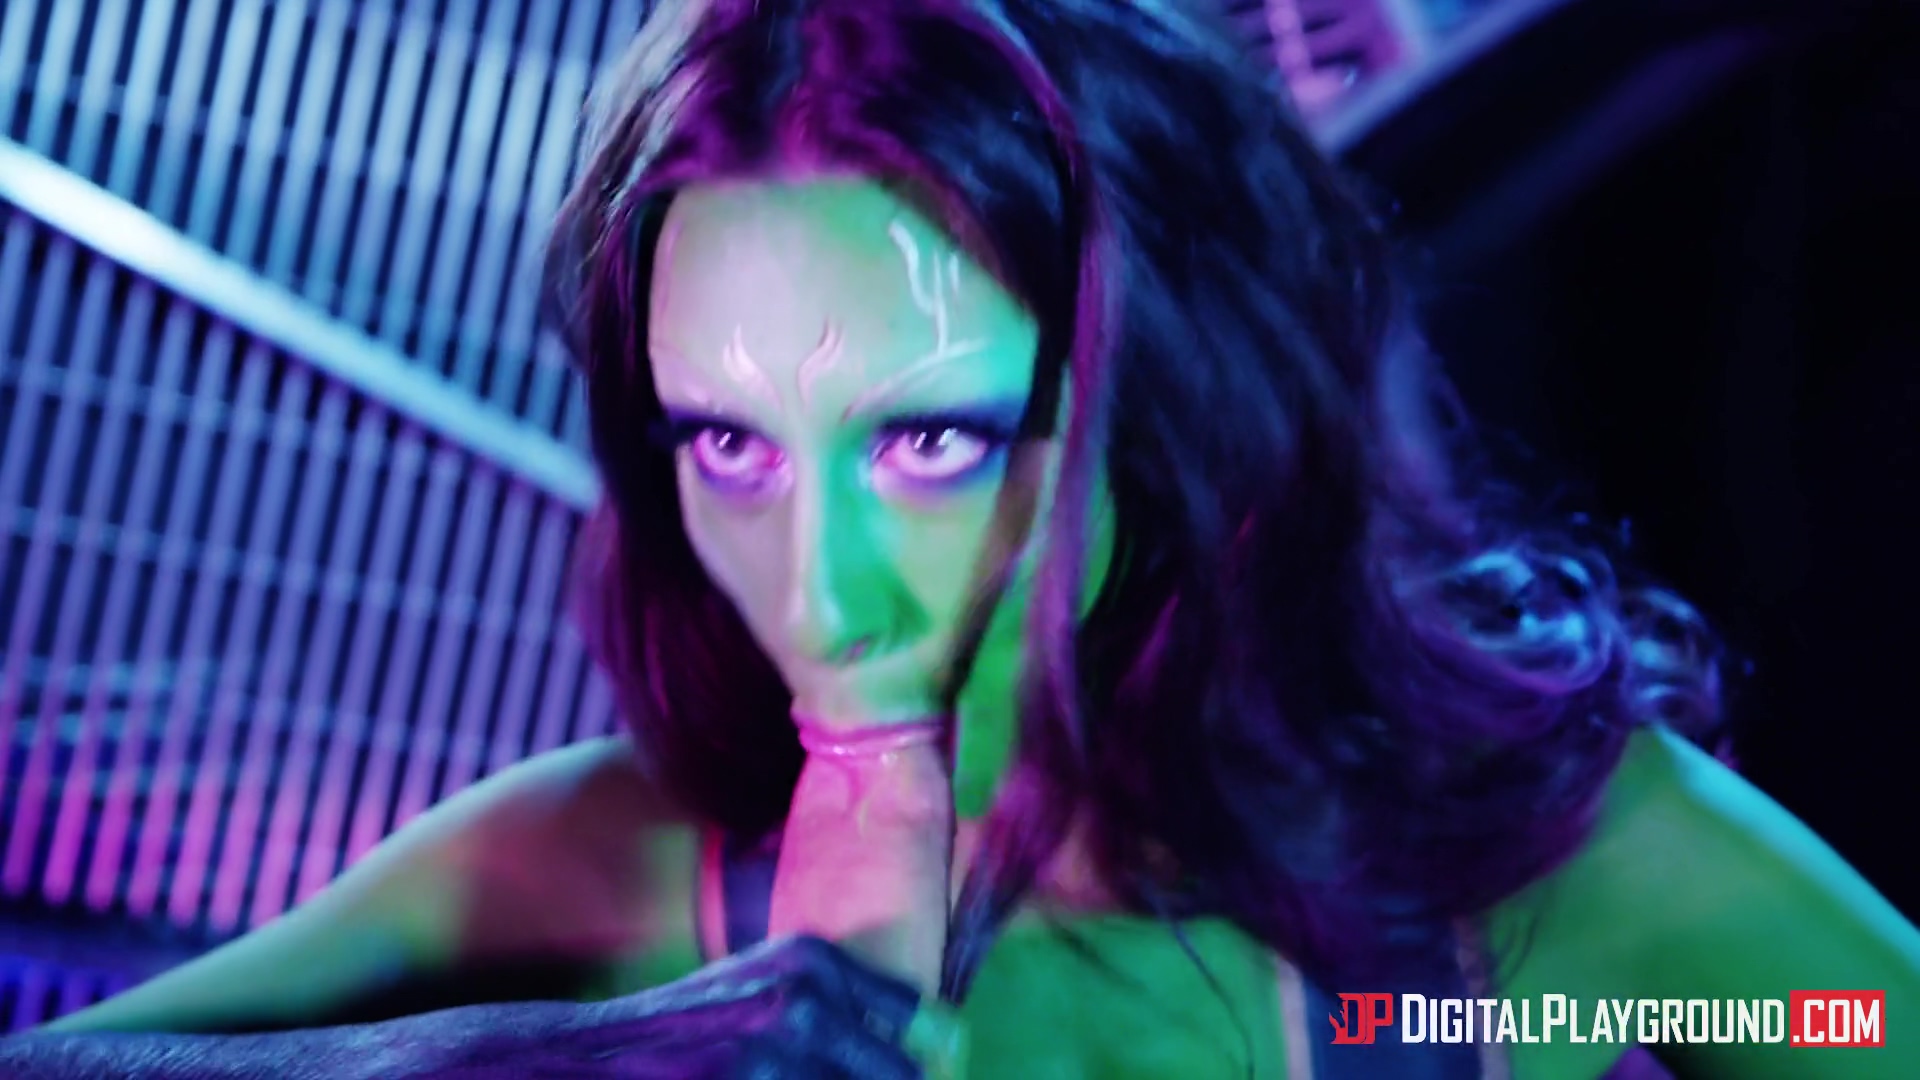 Sex Video Galaxy - Peter And Gamora Saved The Galaxy Once Again Porn Video - VXXX.com